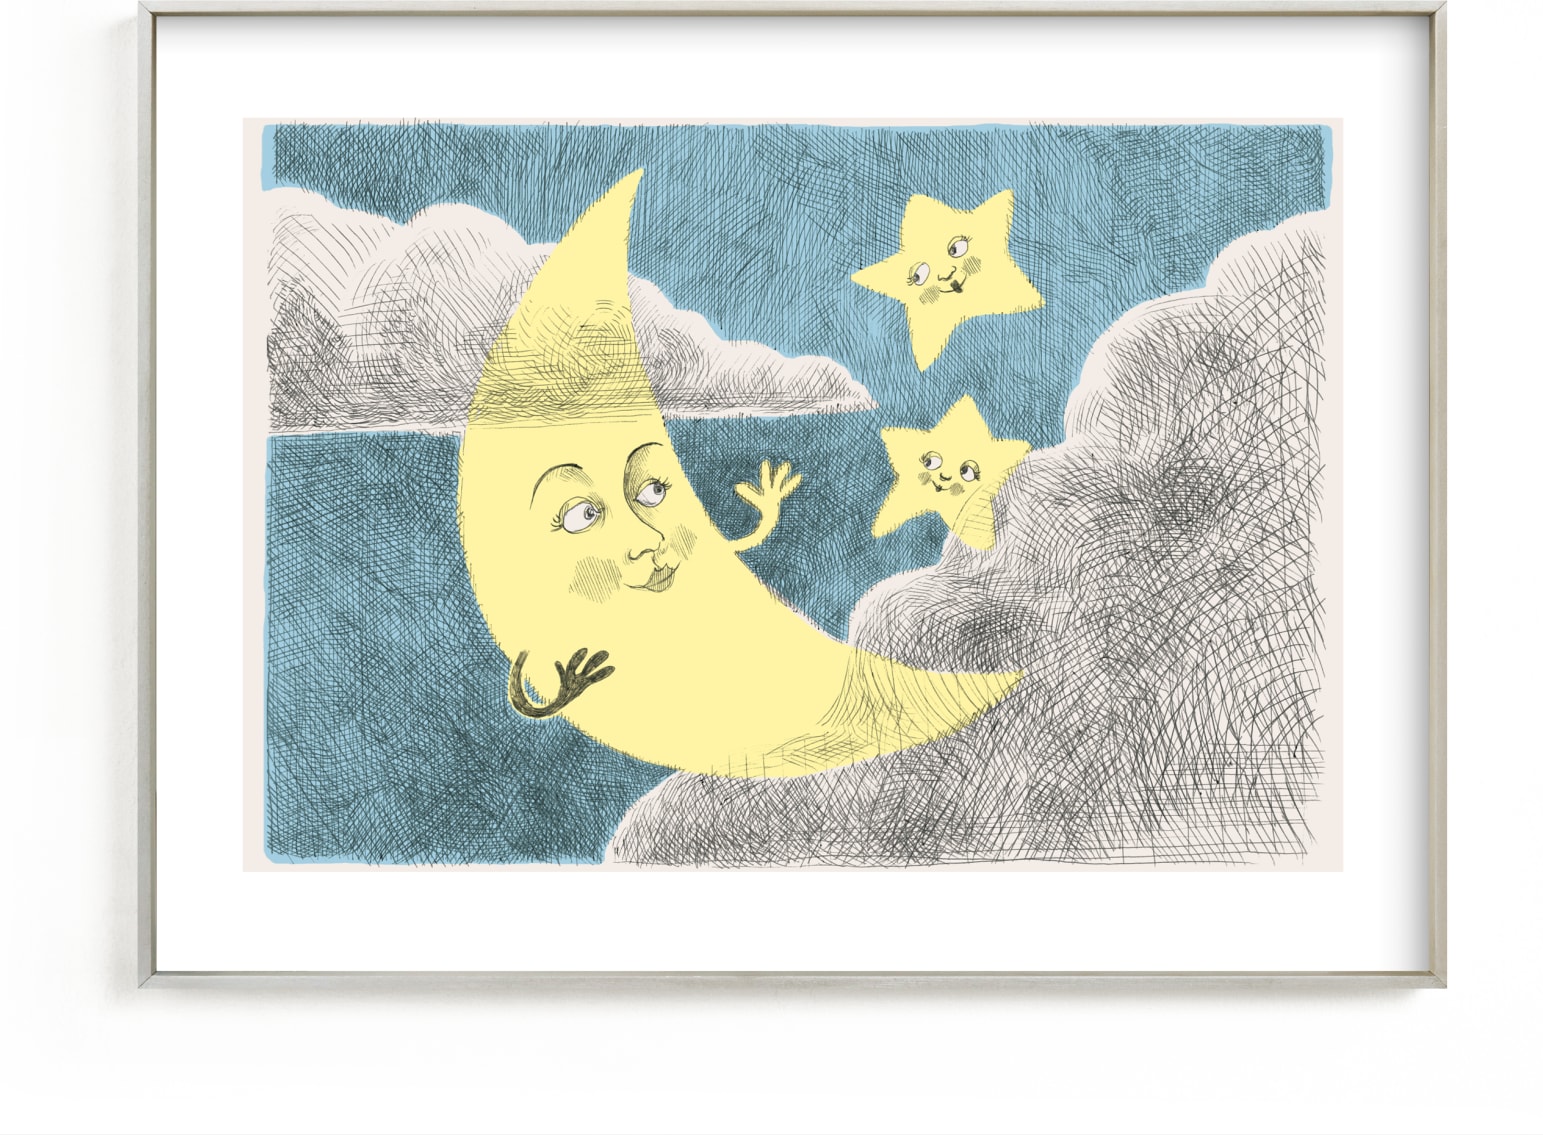 This is a blue nursery wall art by Catilustre called Claire de Lune.